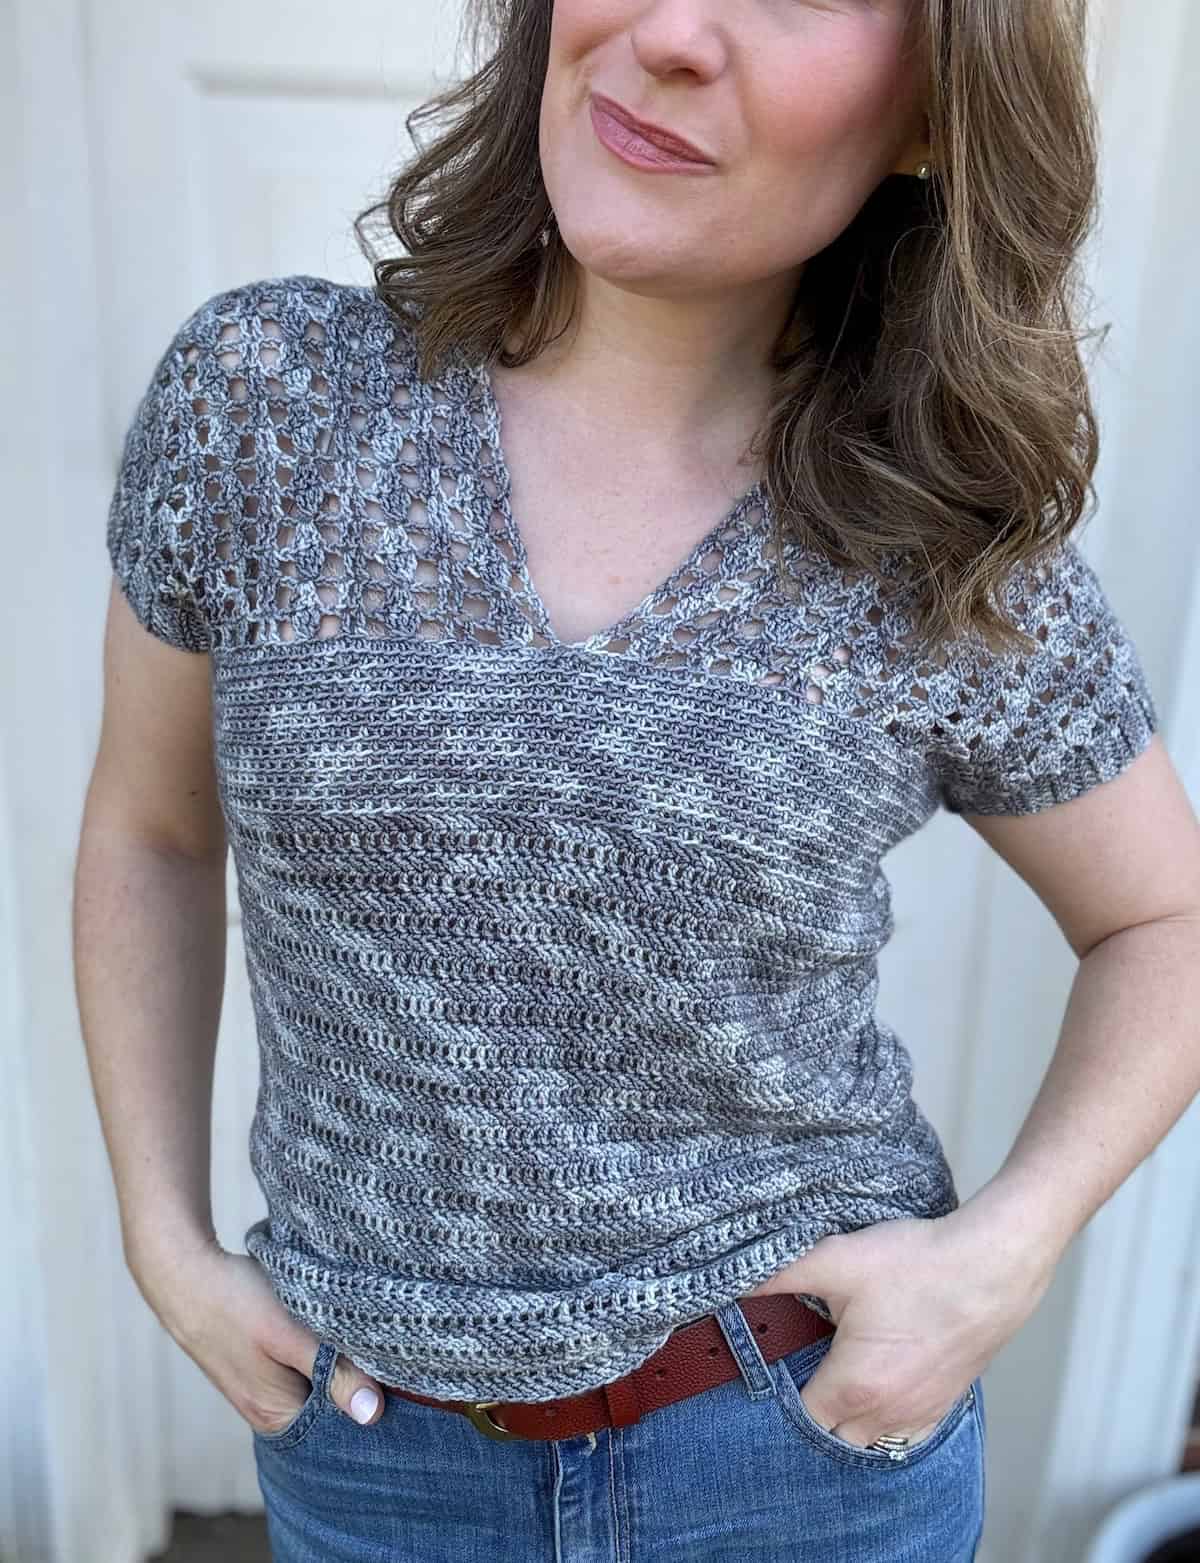 A person wearing a light gray, V-neck crochet top and blue jeans, standing with hands in pockets.